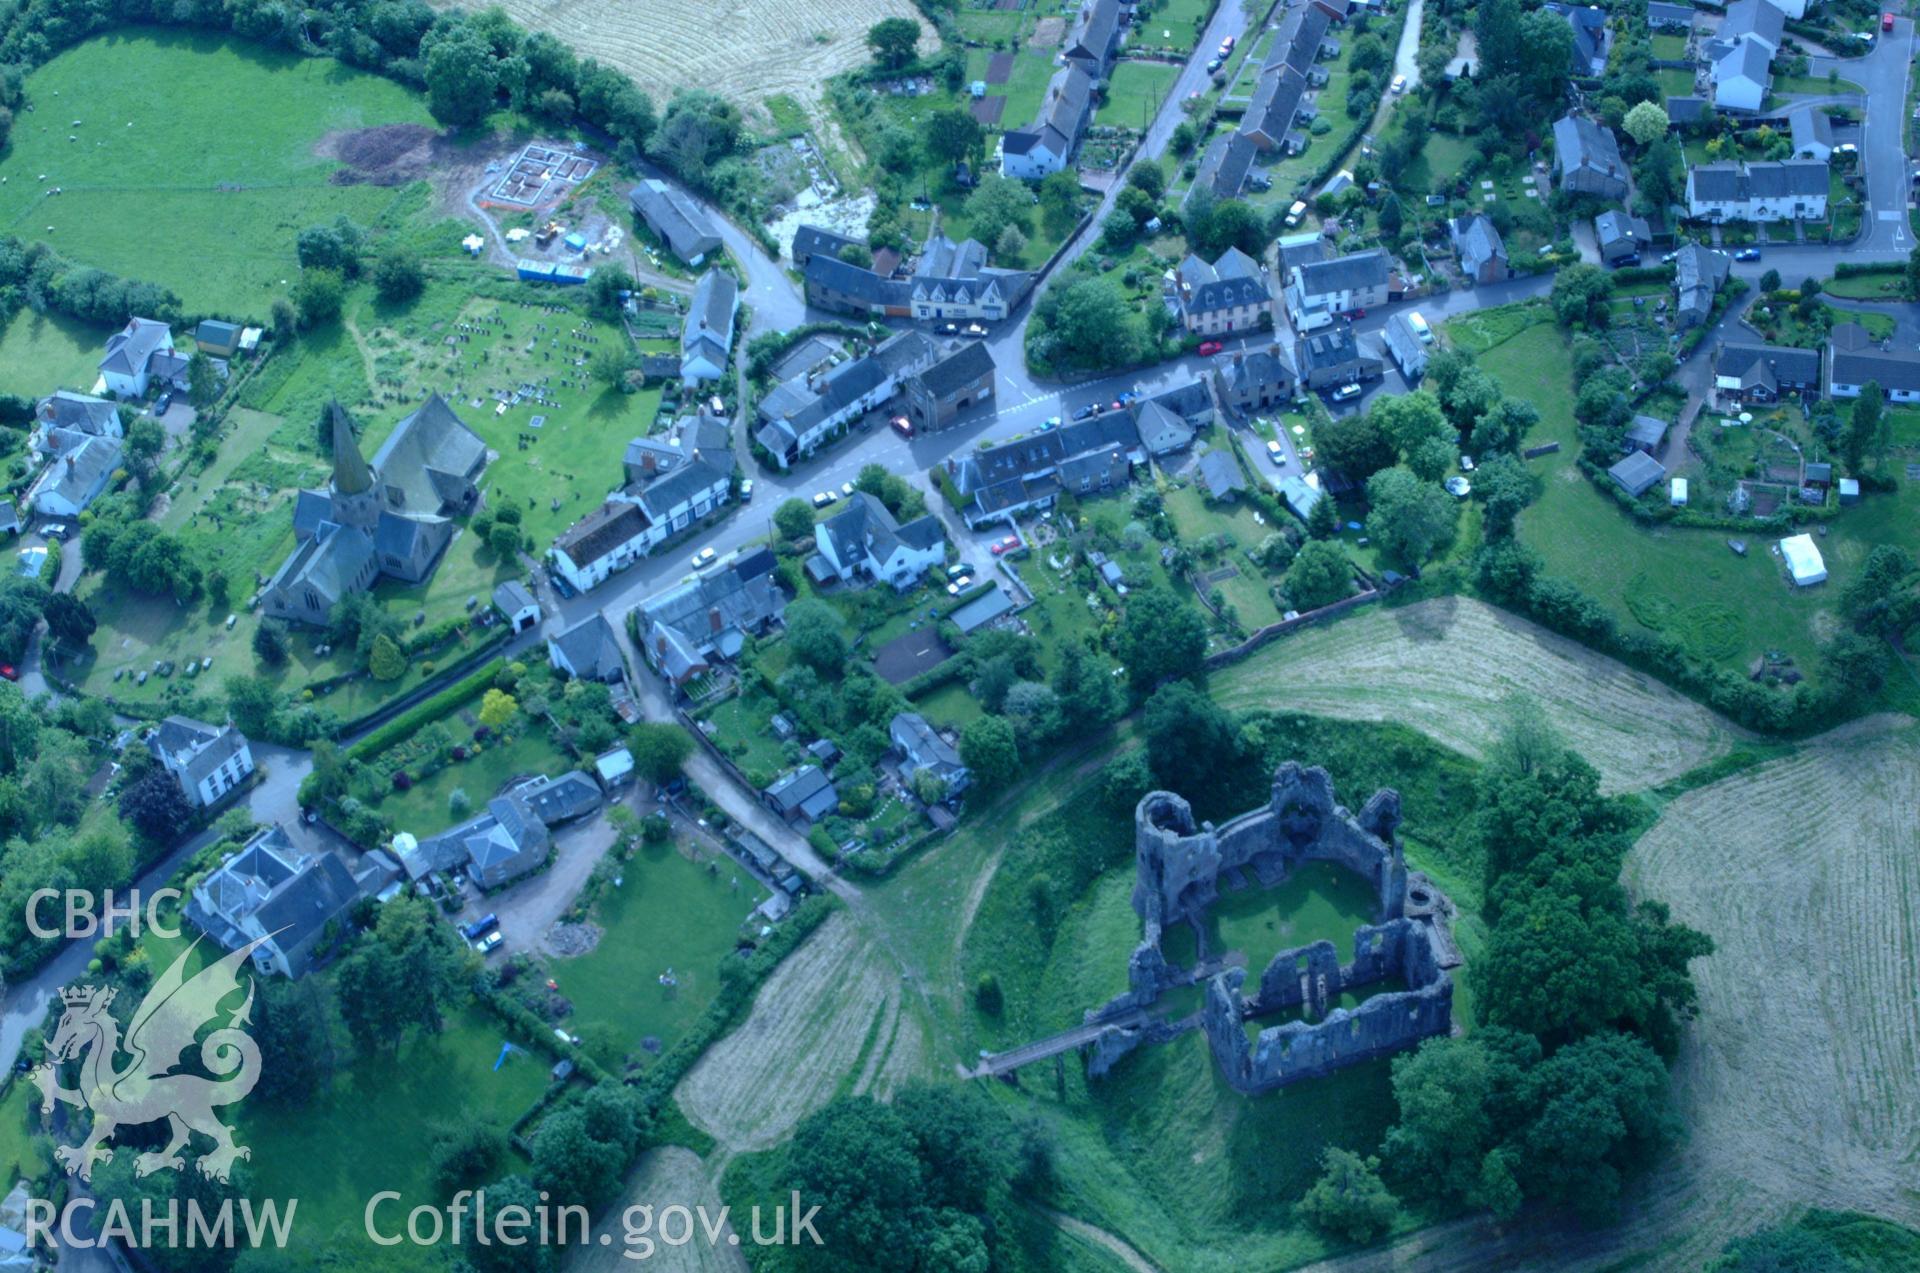 RCAHMW colour oblique aerial photograph of Grosmont taken on 02/06/2004 by Toby Driver